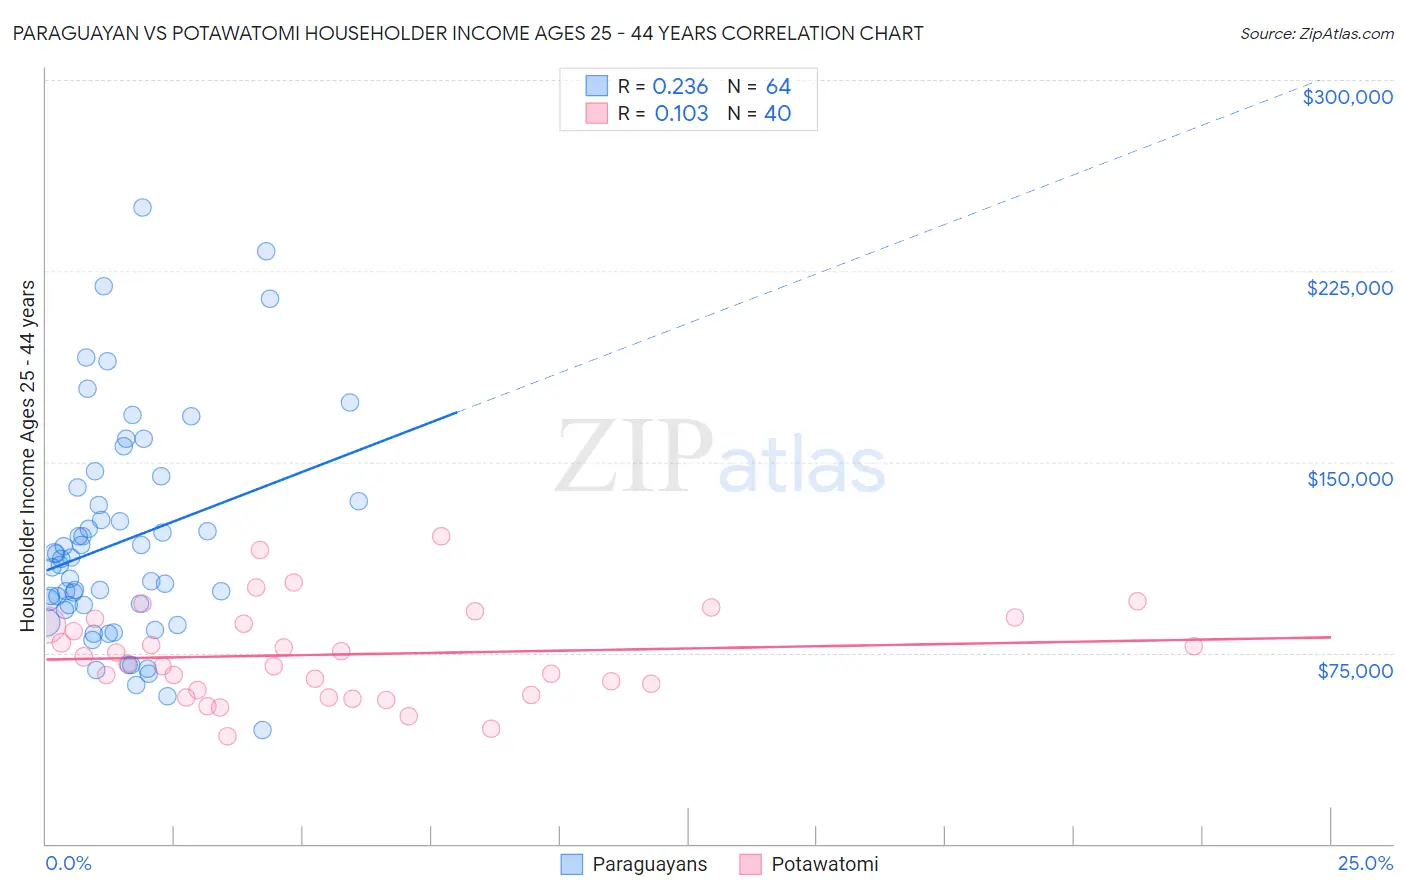 Paraguayan vs Potawatomi Householder Income Ages 25 - 44 years